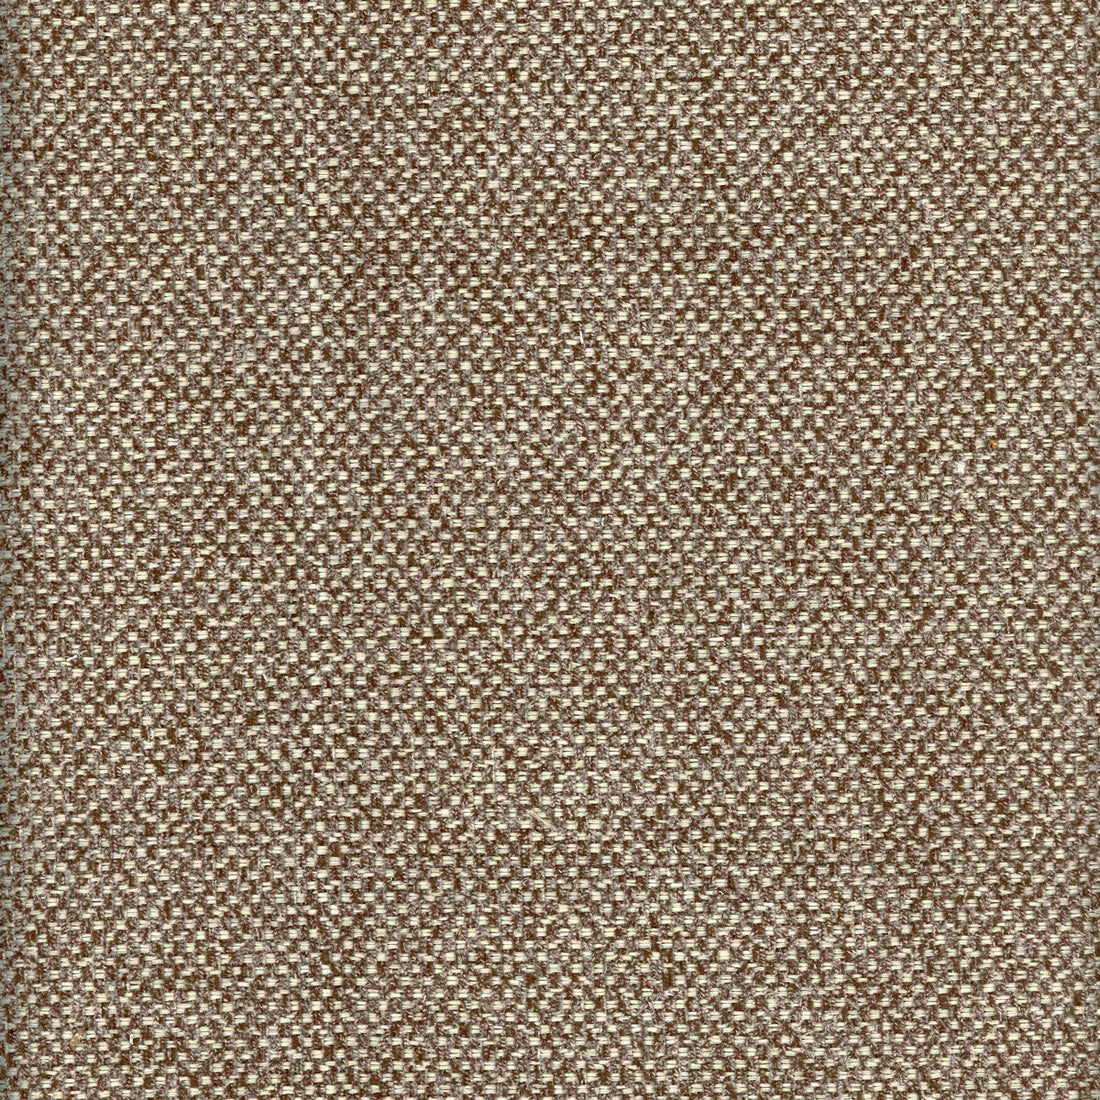 Yosemite fabric in timber color - pattern AM100332.6.0 - by Kravet Couture in the Andrew Martin Canyon collection